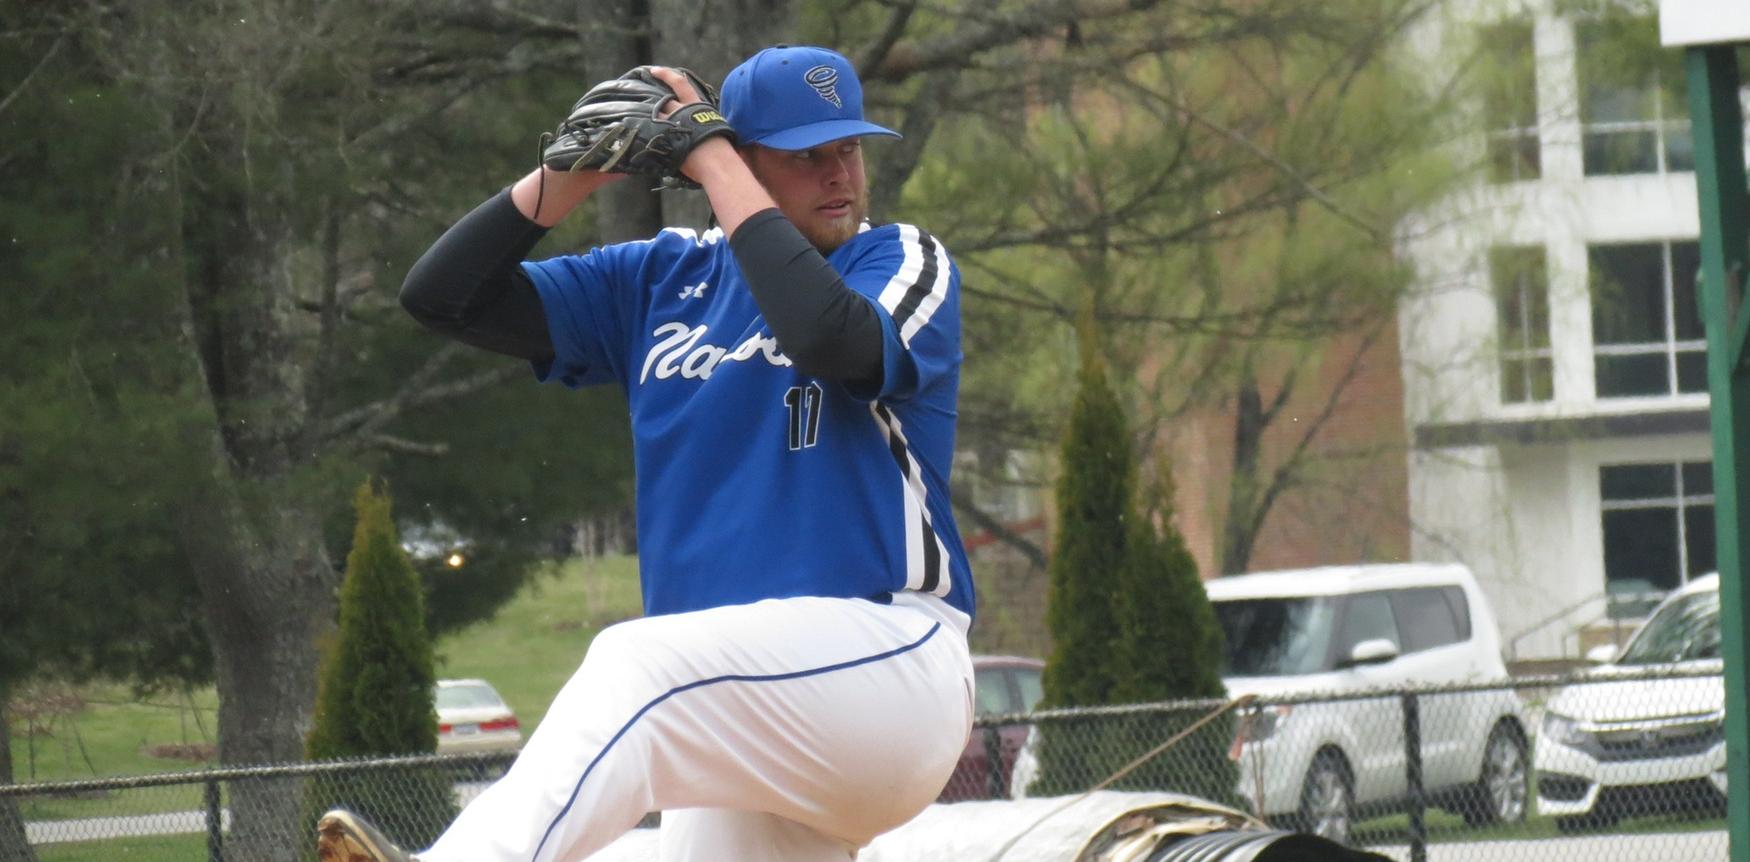 Merryman’s Stellar Outing, Seventh-Inning Rally Lifts Tornados over Wasps